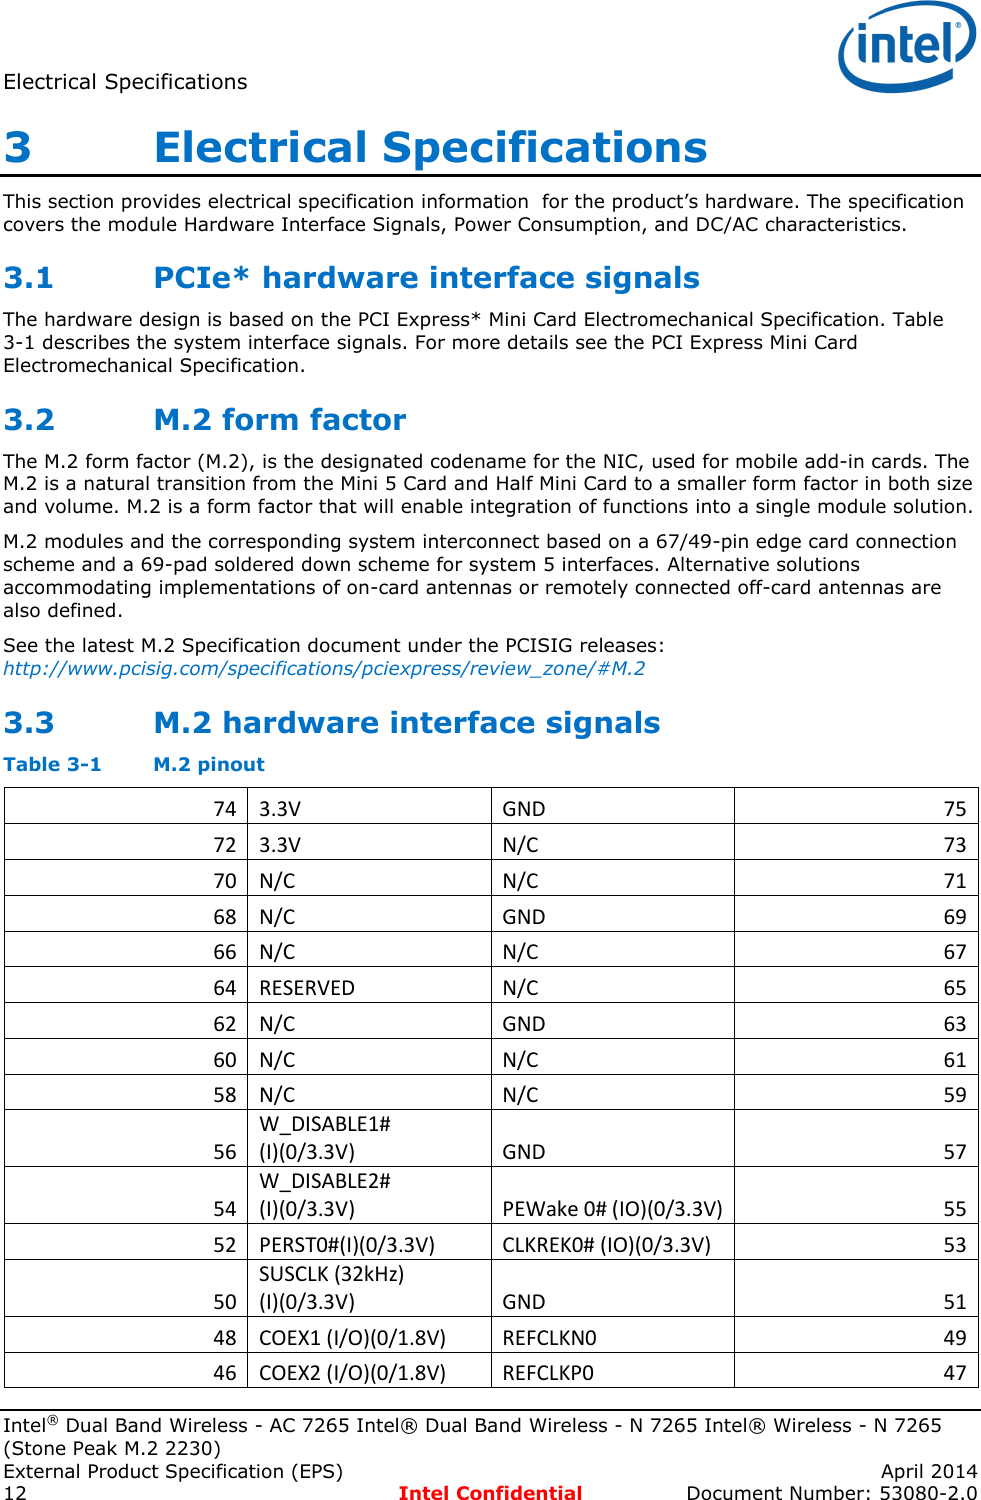 Electrical Specifications   Intel® Dual Band Wireless - AC 7265 Intel® Dual Band Wireless - N 7265 Intel® Wireless - N 7265 (Stone Peak M.2 2230) External Product Specification (EPS)    April 2014 12  Intel Confidential  Document Number: 53080-2.0 3   Electrical Specifications This section provides electrical specification information  for the product’s hardware. The specification covers the module Hardware Interface Signals, Power Consumption, and DC/AC characteristics.  3.1 PCIe* hardware interface signals The hardware design is based on the PCI Express* Mini Card Electromechanical Specification. Table 3-1 describes the system interface signals. For more details see the PCI Express Mini Card Electromechanical Specification. 3.2 M.2 form factor The M.2 form factor (M.2), is the designated codename for the NIC, used for mobile add-in cards. The M.2 is a natural transition from the Mini 5 Card and Half Mini Card to a smaller form factor in both size and volume. M.2 is a form factor that will enable integration of functions into a single module solution.  M.2 modules and the corresponding system interconnect based on a 67/49-pin edge card connection scheme and a 69-pad soldered down scheme for system 5 interfaces. Alternative solutions accommodating implementations of on-card antennas or remotely connected off-card antennas are also defined. See the latest M.2 Specification document under the PCISIG releases: http://www.pcisig.com/specifications/pciexpress/review_zone/#M.2 3.3 M.2 hardware interface signals Table 3-1  M.2 pinout 74 3.3V GND 75 72 3.3V N/C 73 70 N/C N/C 71 68 N/C GND 69 66 N/C N/C 67 64 RESERVED N/C 65 62 N/C GND 63 60 N/C N/C 61 58 N/C N/C 59 56 W_DISABLE1# (I)(0/3.3V) GND 57 54 W_DISABLE2# (I)(0/3.3V) PEWake 0# (IO)(0/3.3V) 55 52 PERST0#(I)(0/3.3V) CLKREK0# (IO)(0/3.3V) 53 50 SUSCLK (32kHz) (I)(0/3.3V) GND 51 48 COEX1 (I/O)(0/1.8V) REFCLKN0 49 46 COEX2 (I/O)(0/1.8V) REFCLKP0 47 